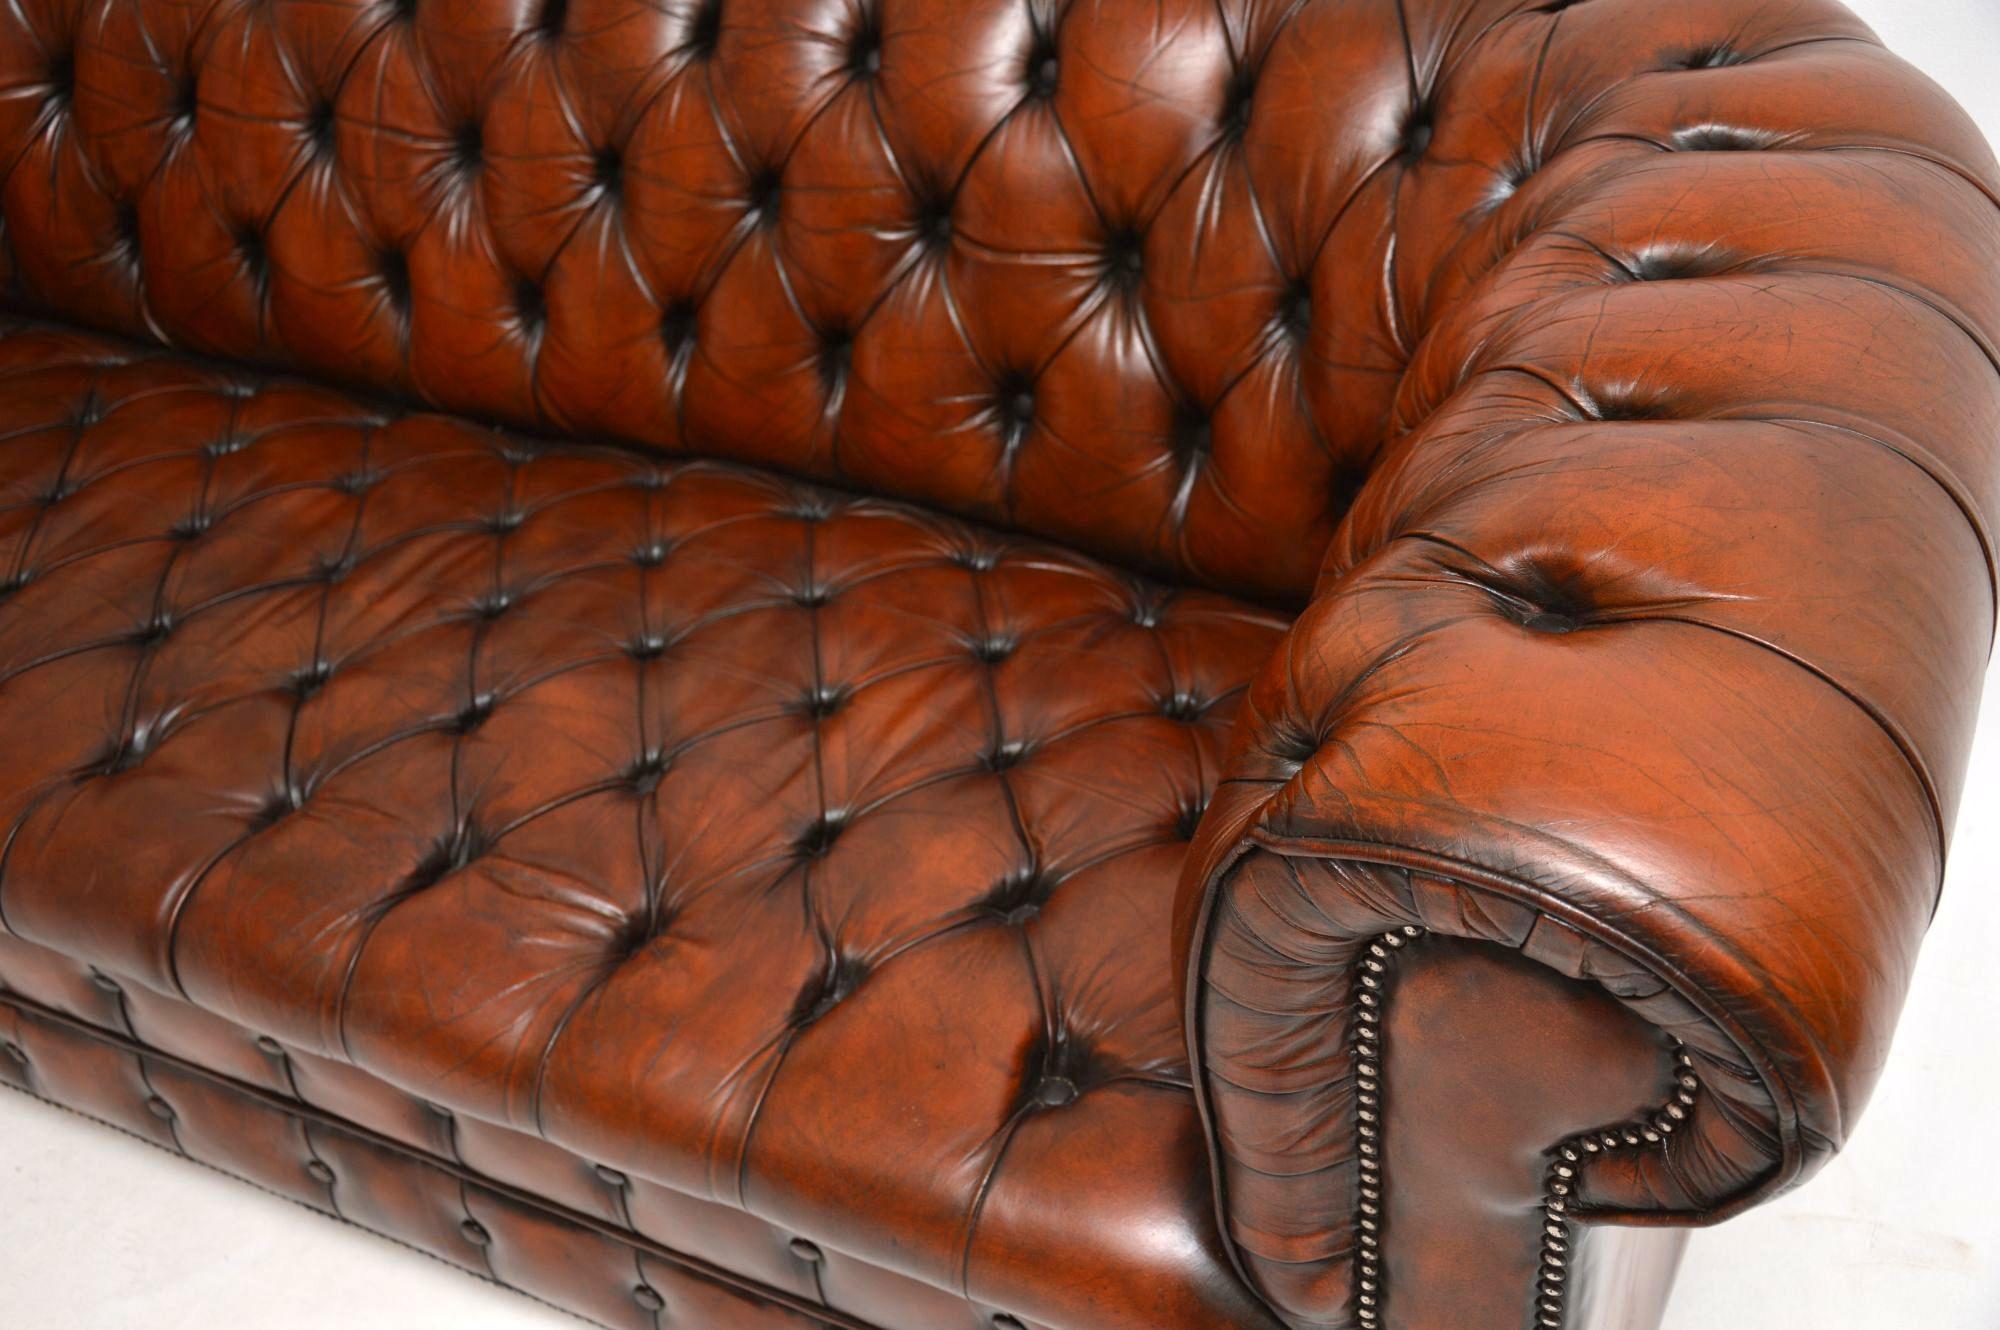 English Antique Victorian Style Deep Buttoned Leather Chesterfield Sofa